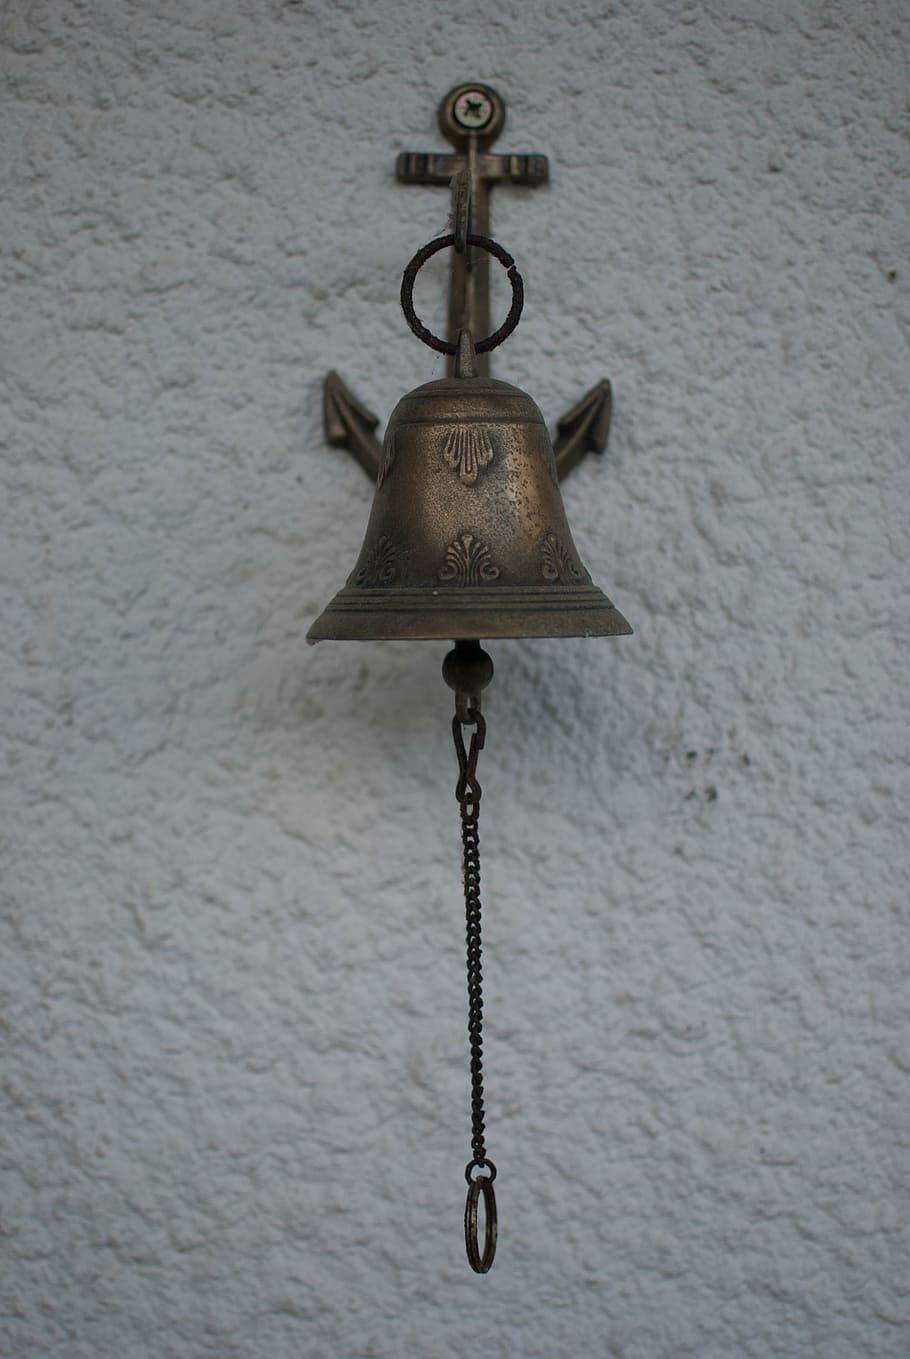 bell, copper, hanging, metal, wall - building feature, chain, close-up, indoors, old, key